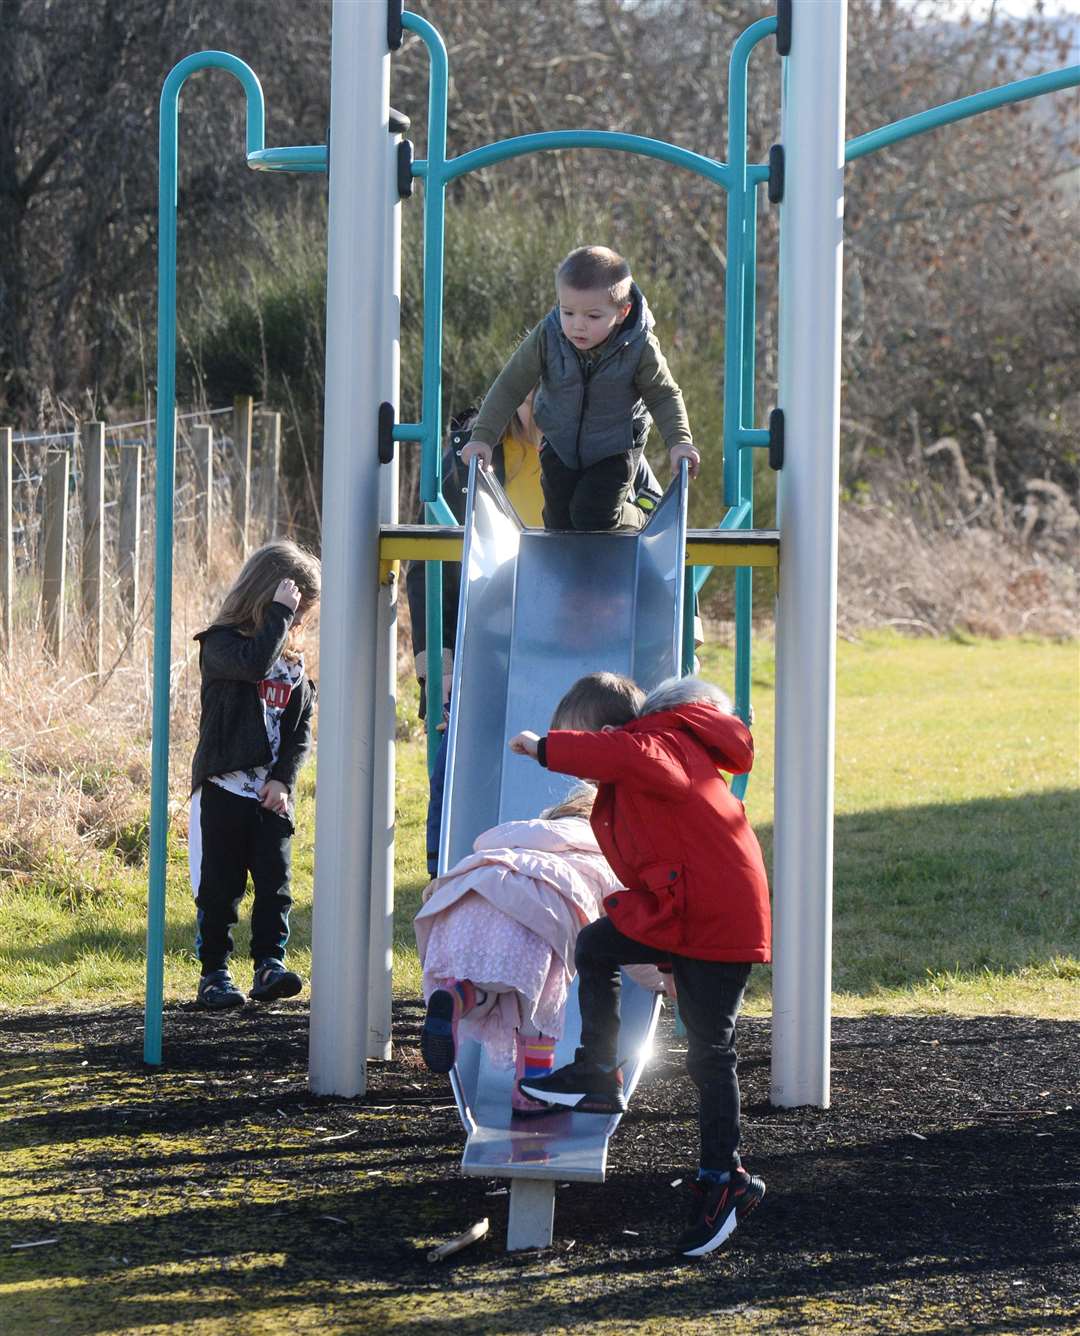 A review of play parks will take into account play equipment and its condition, and the use and ownership of play parks.